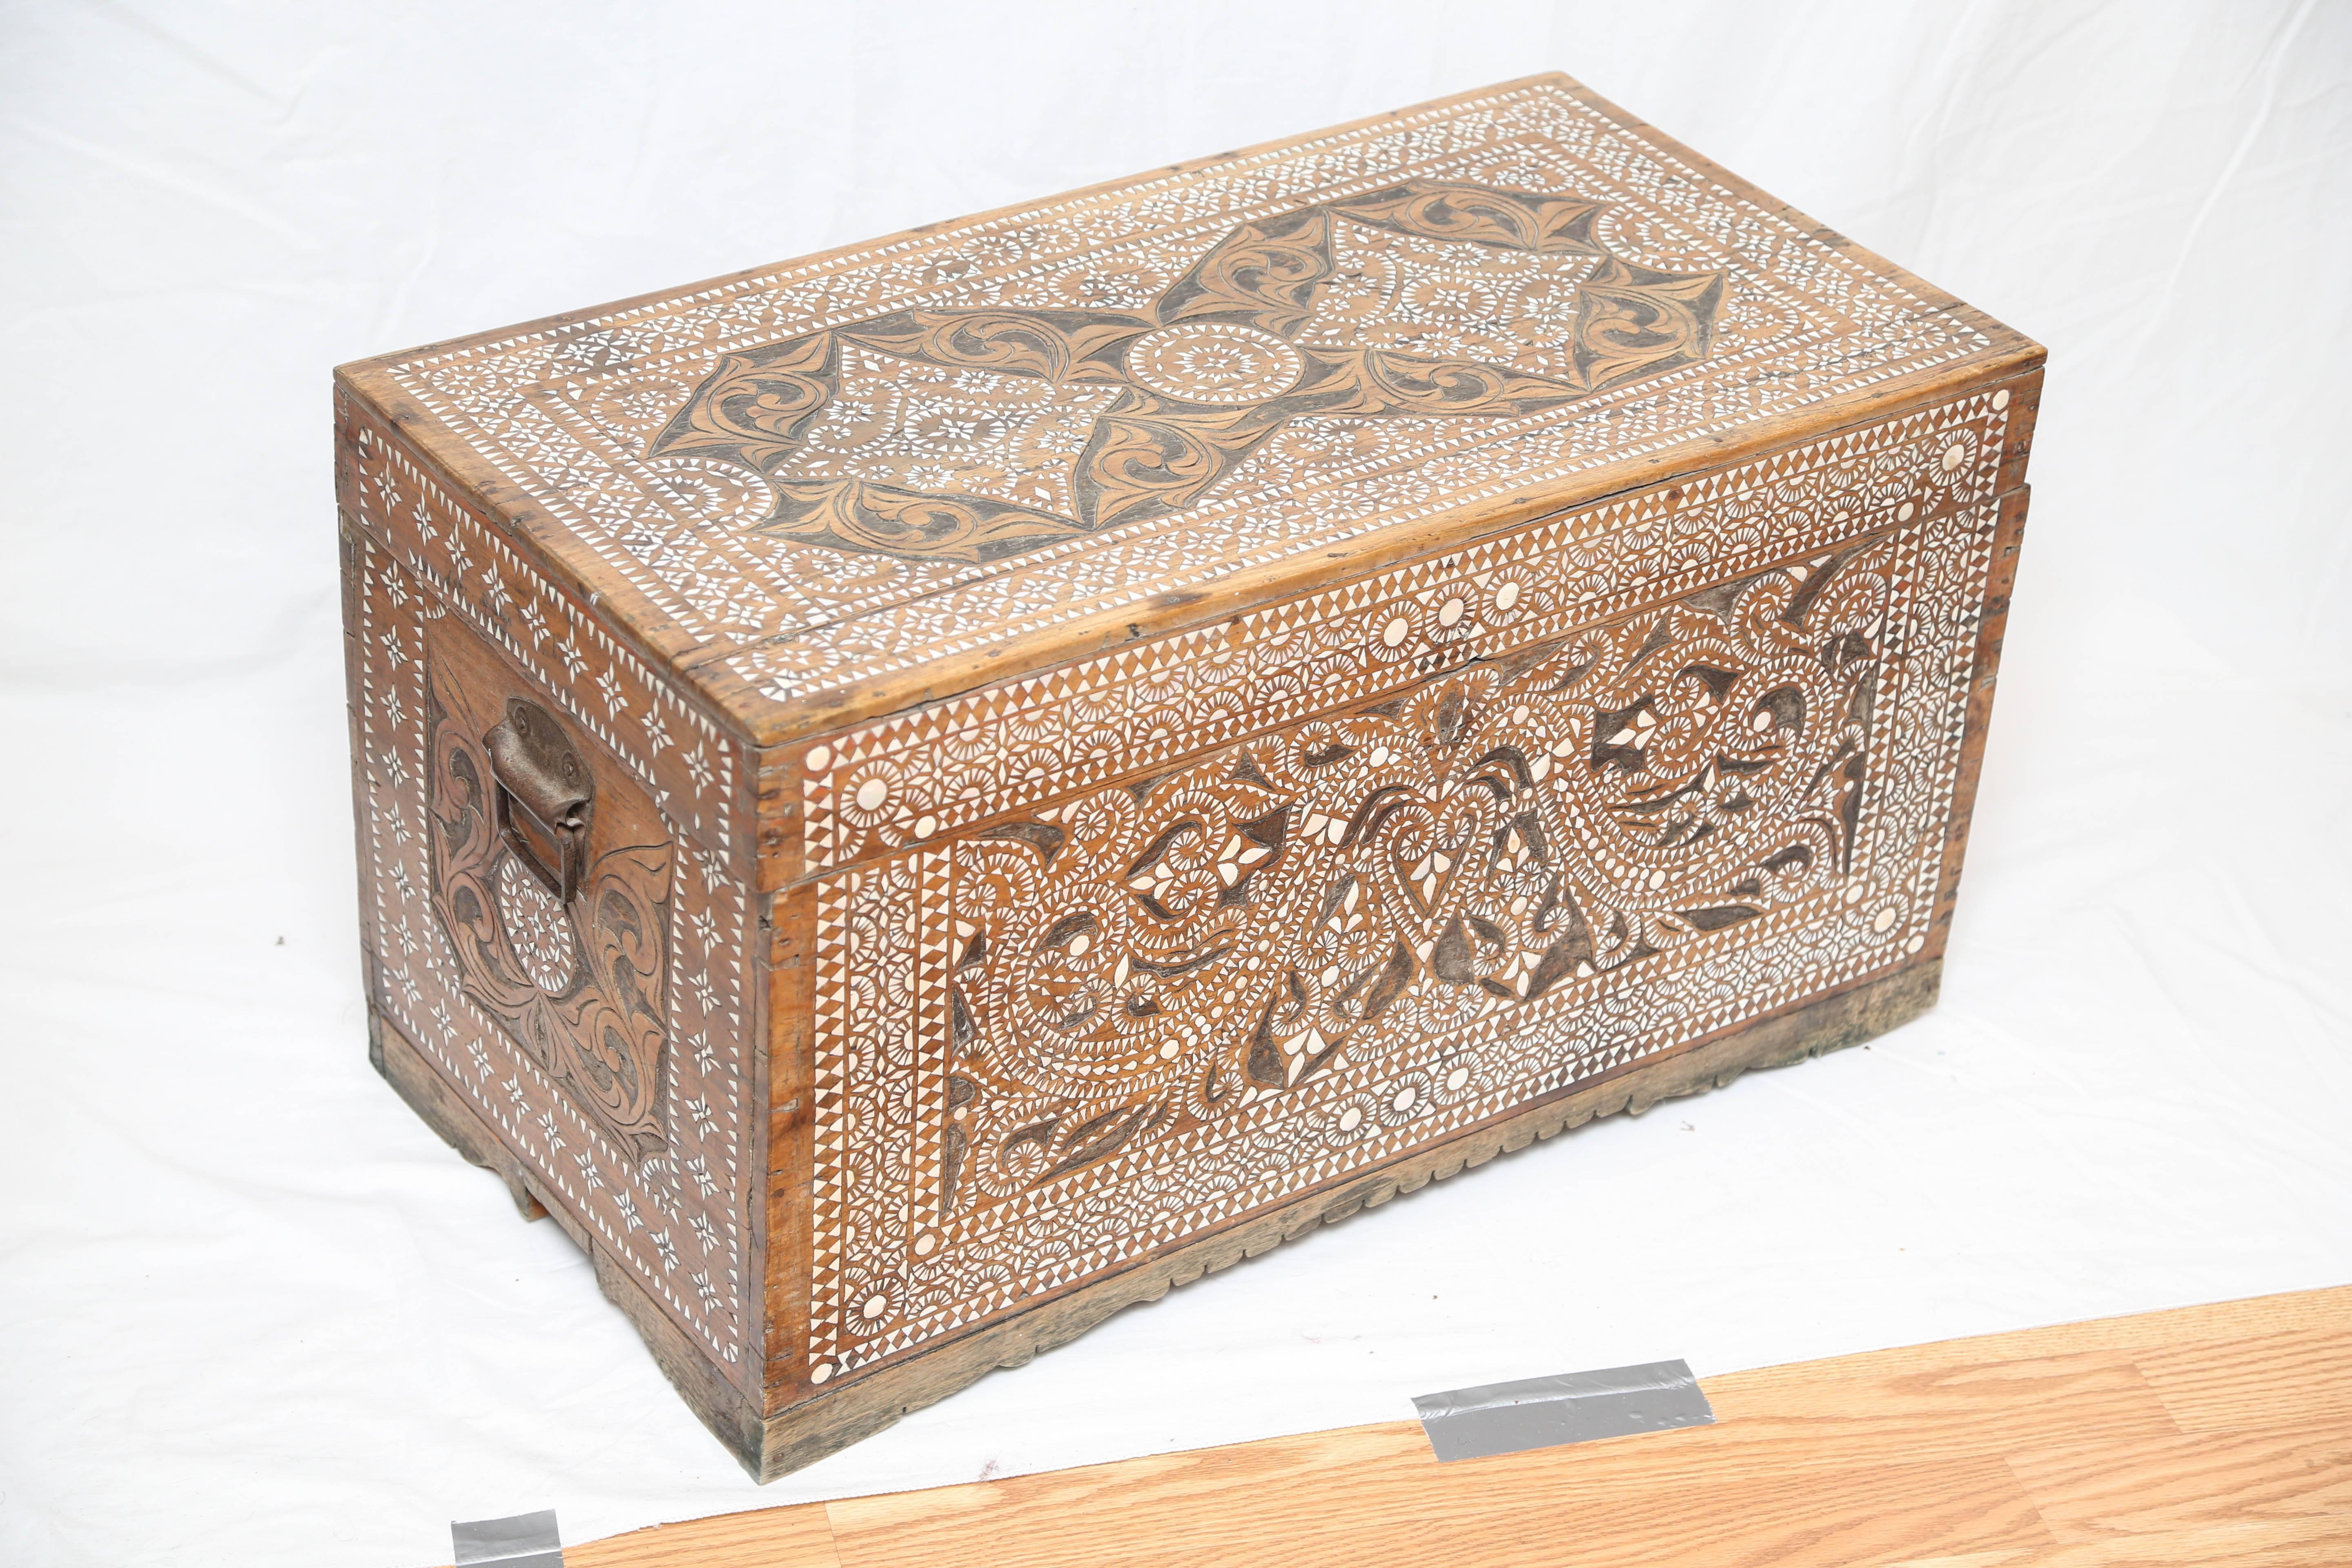 Beautifully carved and detailed Syrian trunk from the late 19th century. Intricate design with inlaid mother-of-pearl.